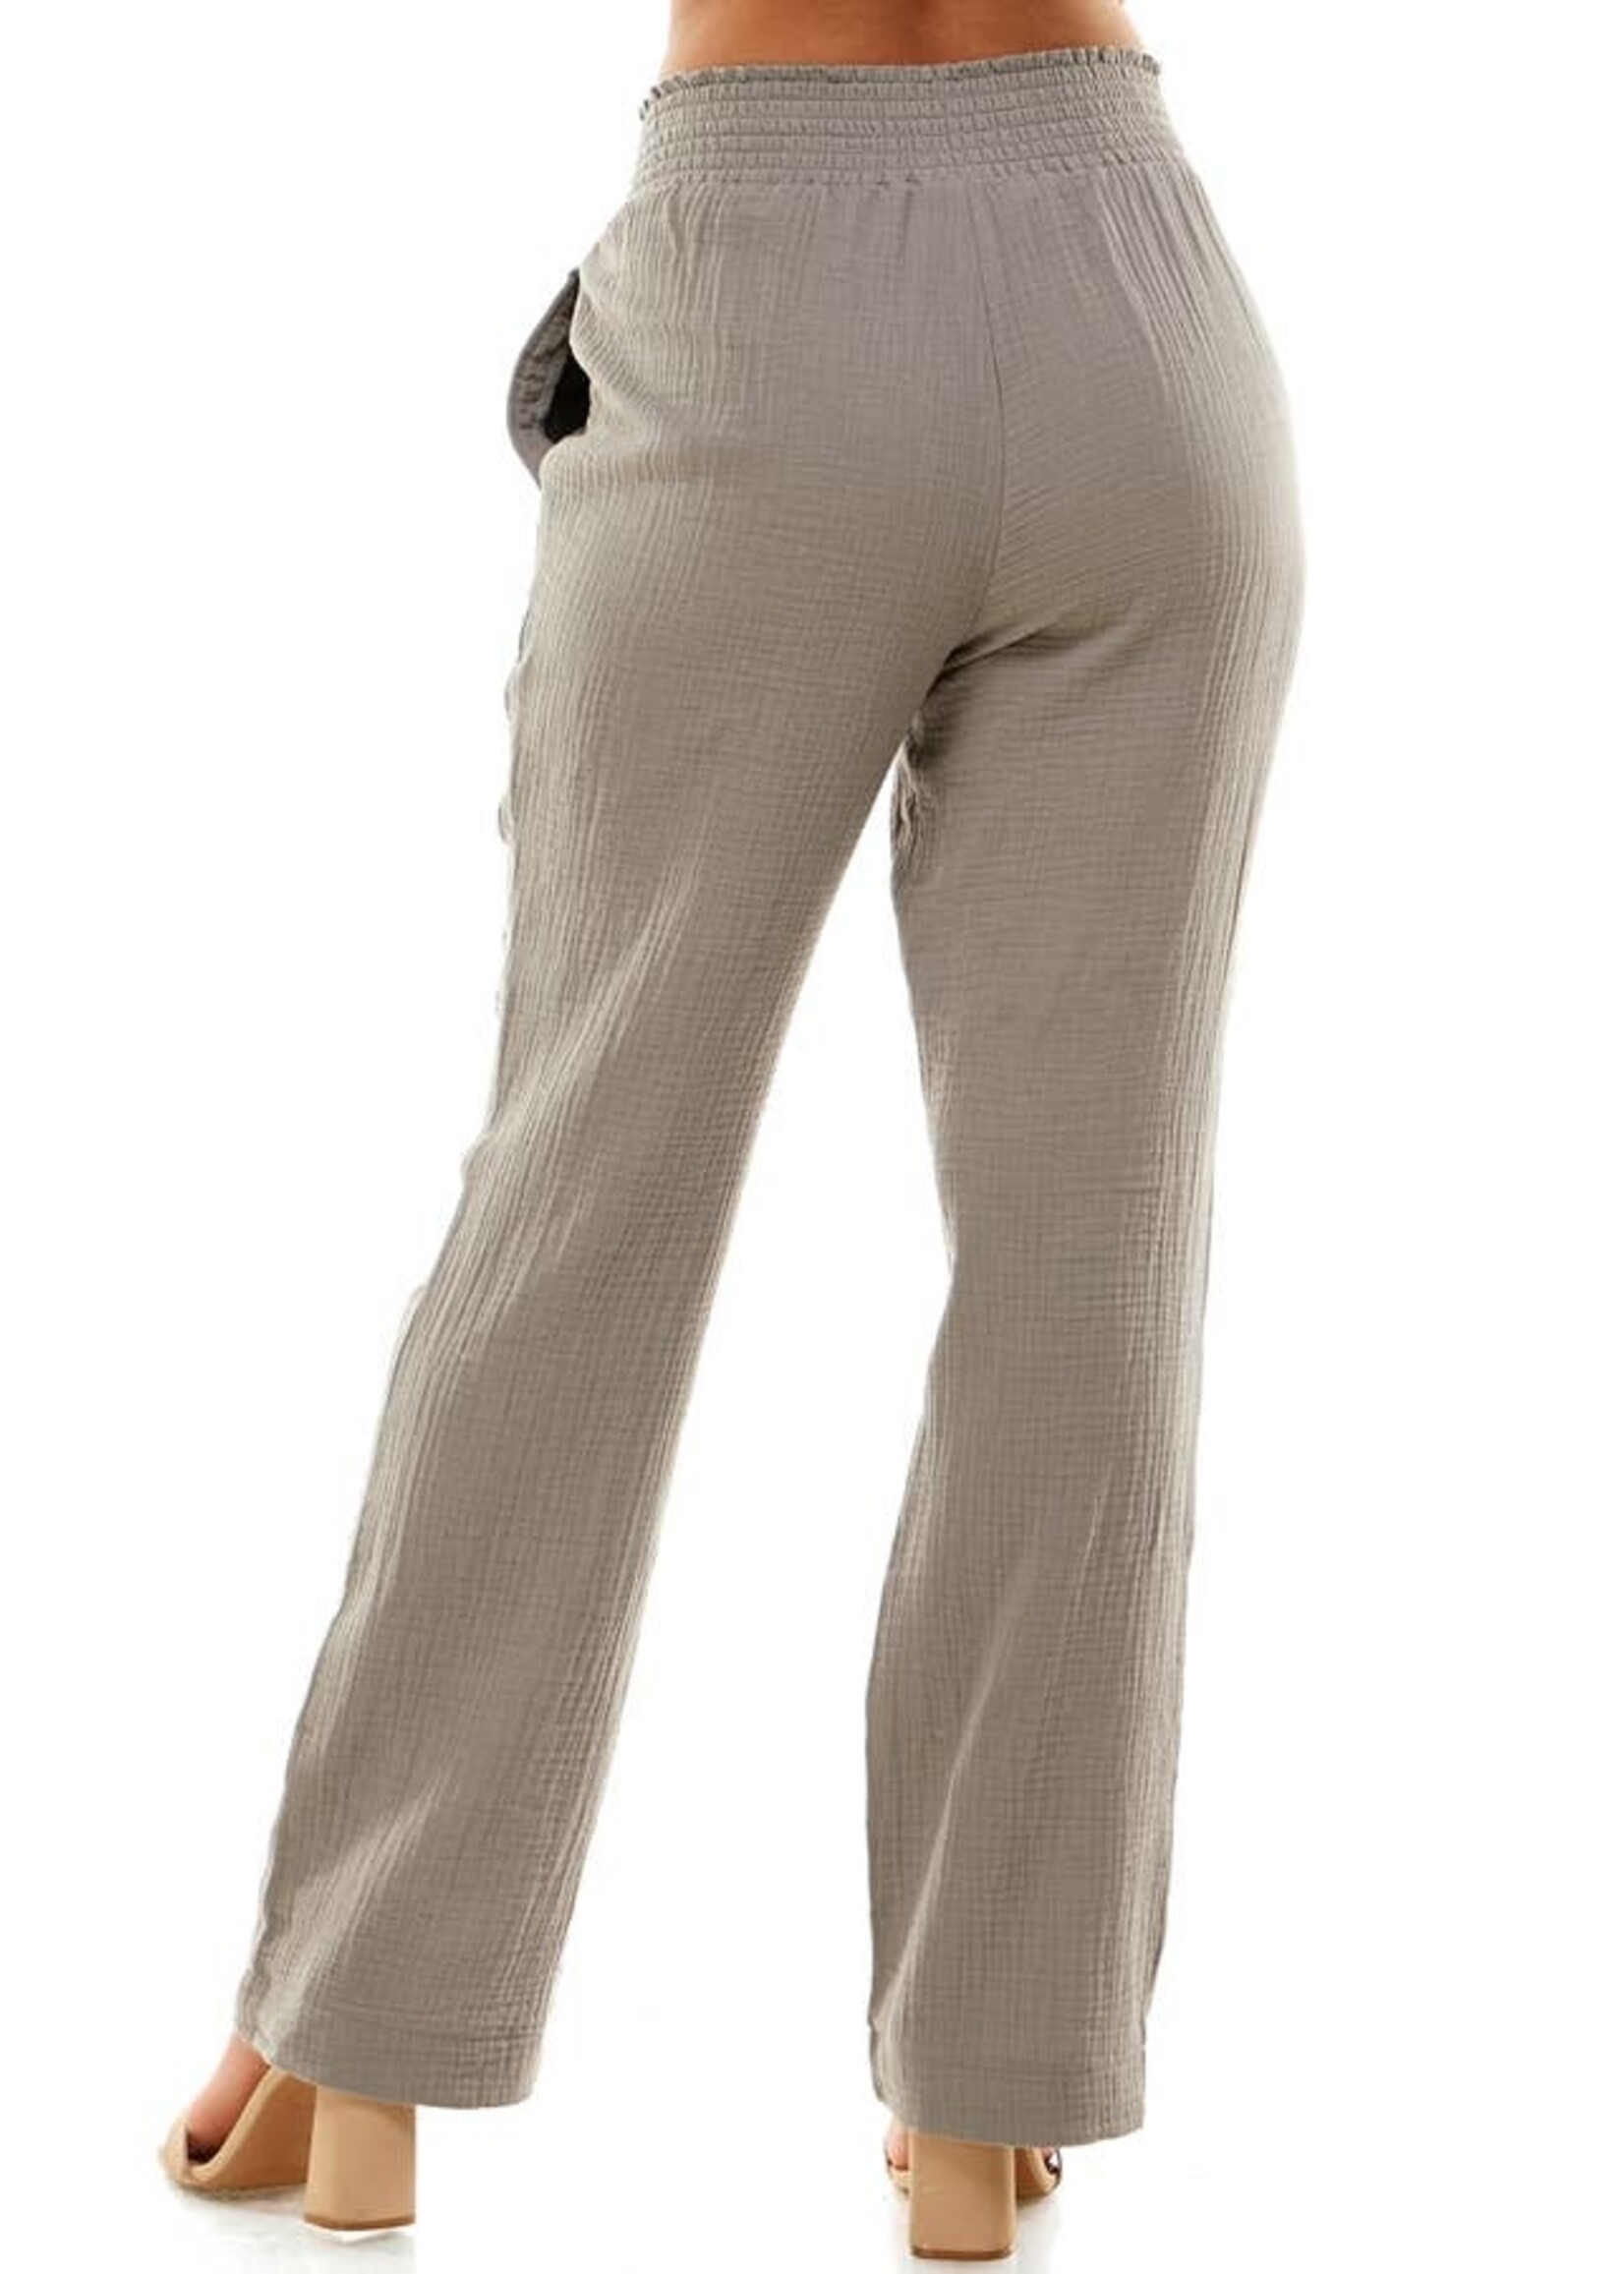 Grey Double Gauze Pants with Elastic Waistband - For The Love of Shoes NY